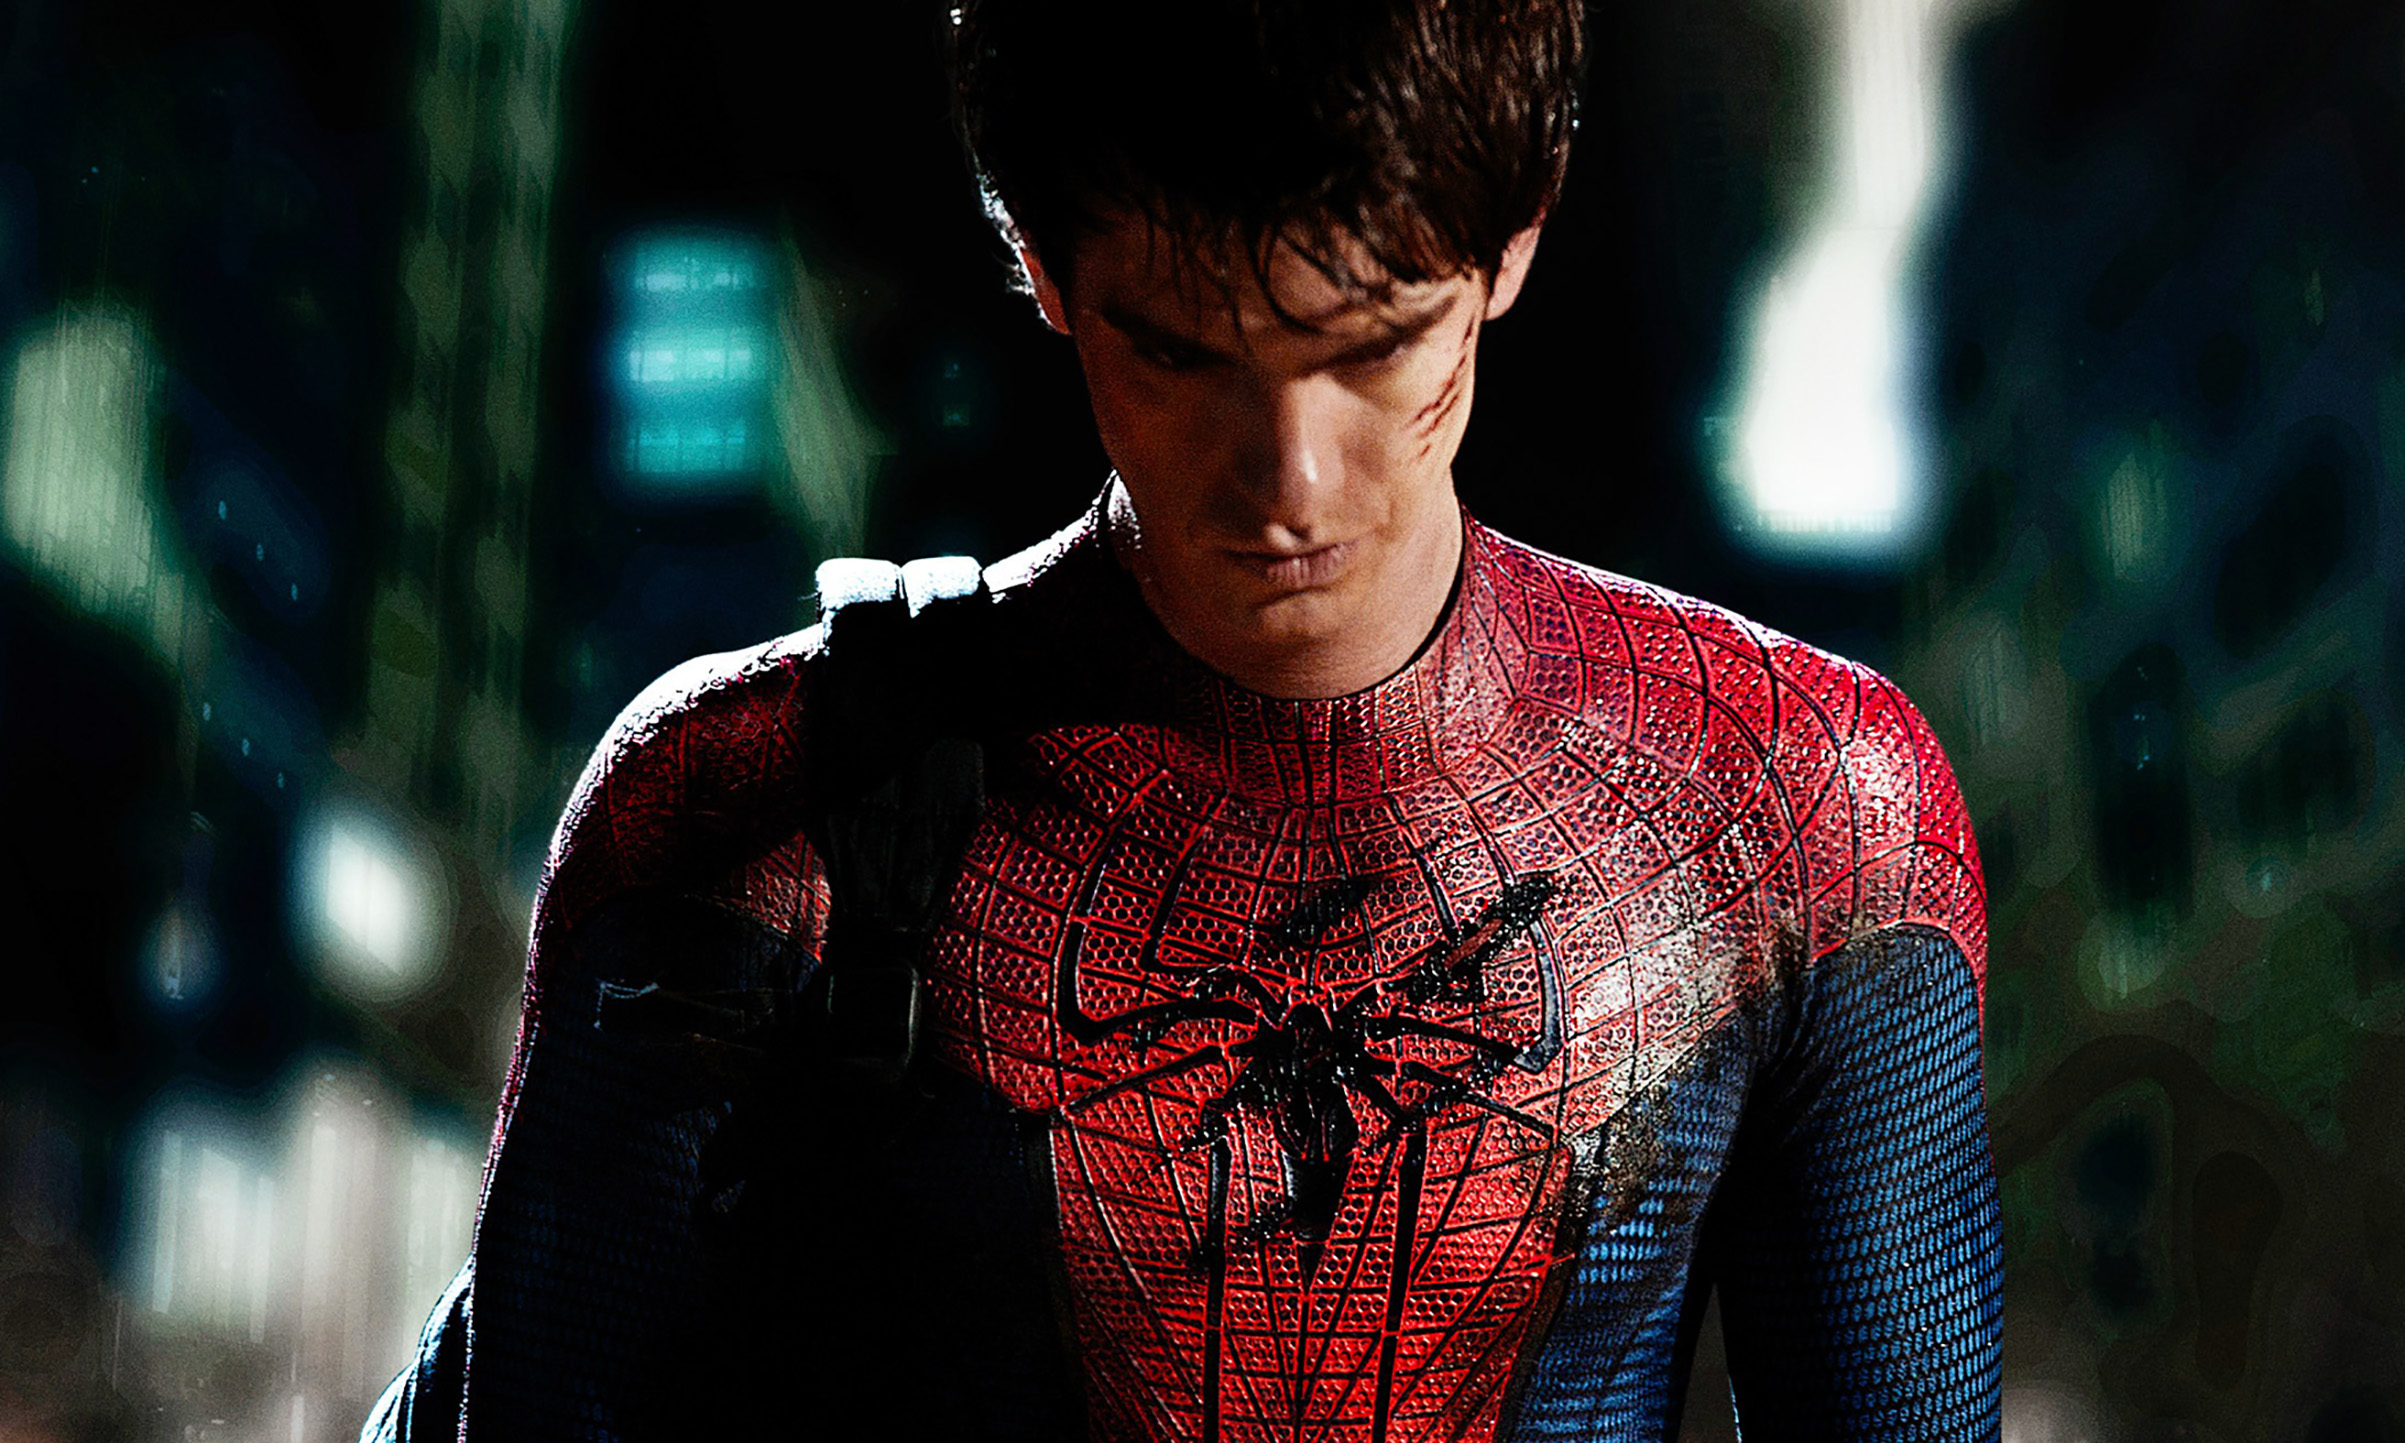 Andrew Garfield as Spider-Man (Columbia Pictures)